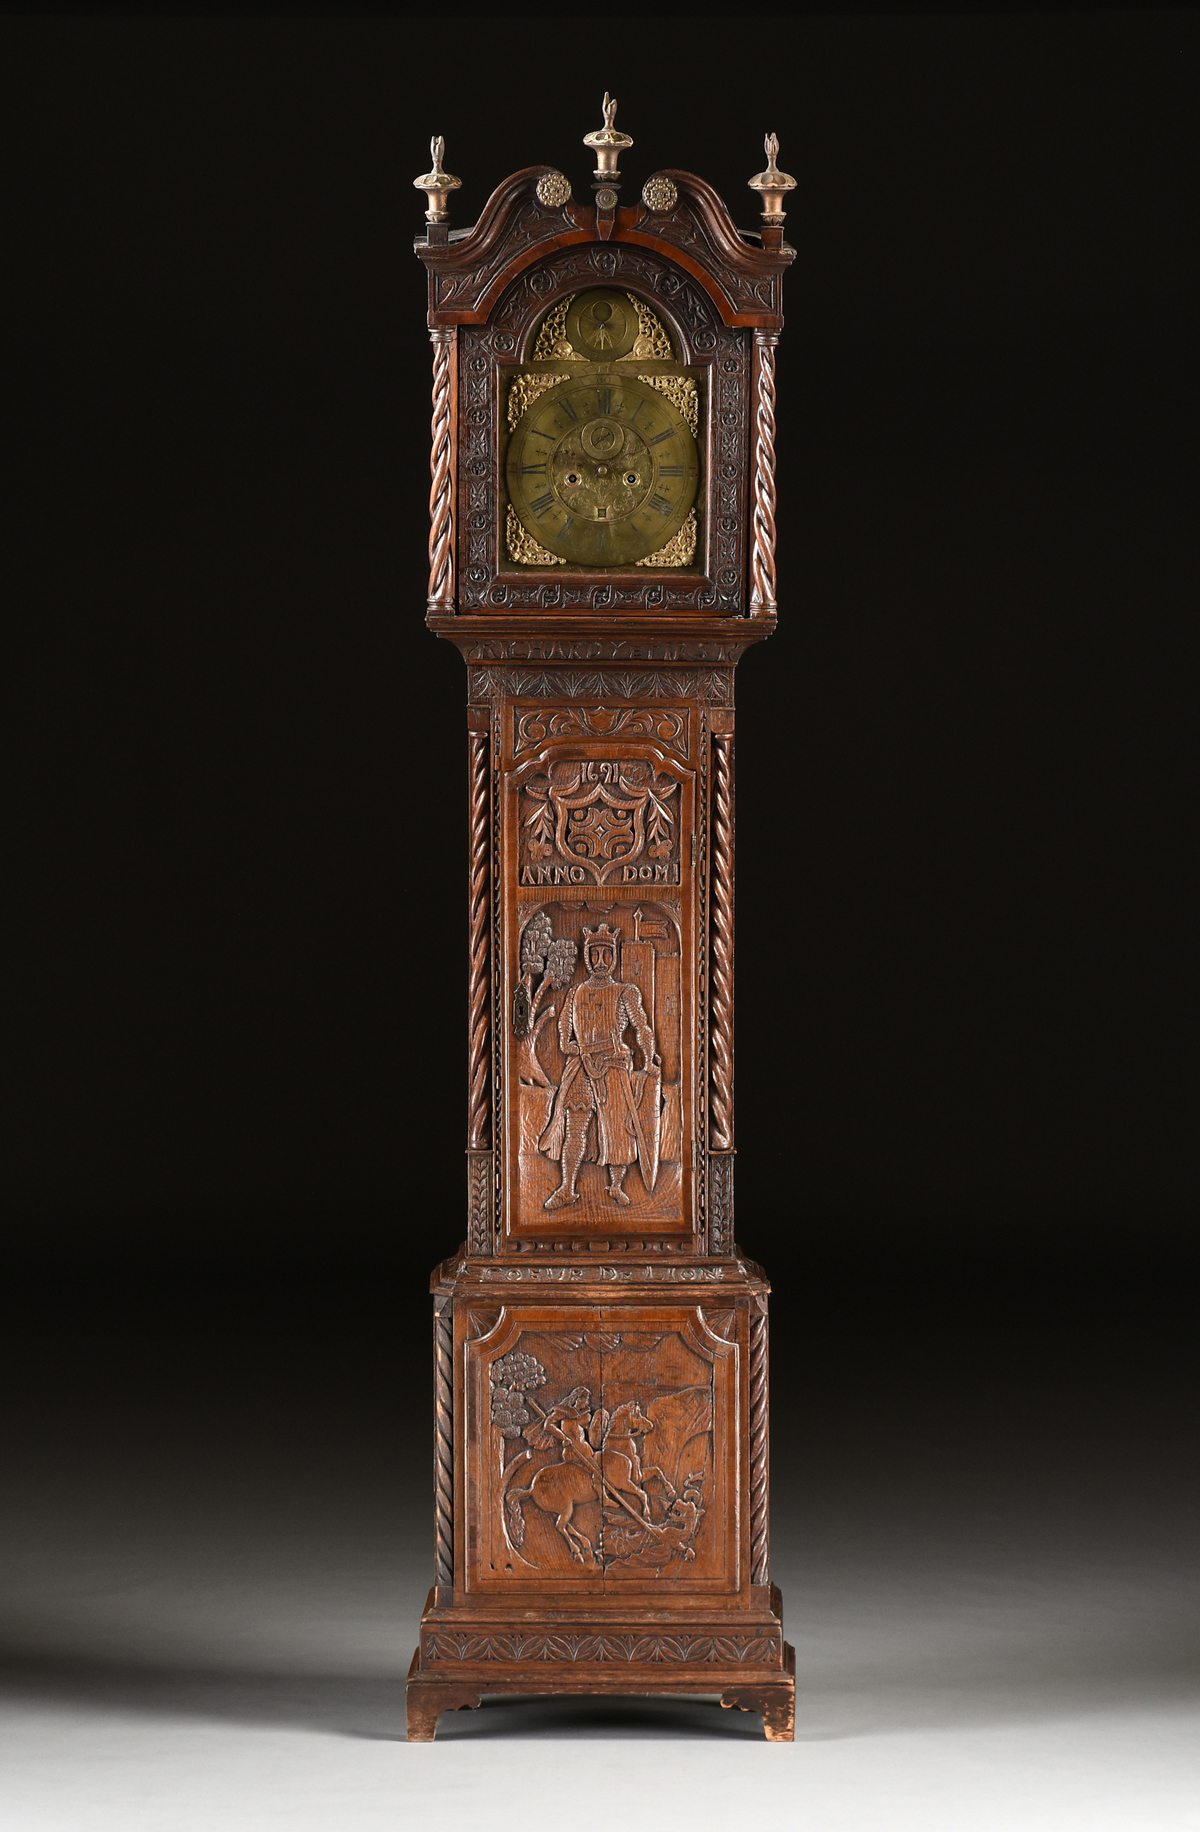 AN ENGLISH GOTHIC STYLE OAK TALL CASE CLOCK, WORKS BY WILLIAM ELEMENT, ST. ALBANS, 17TH/18TH